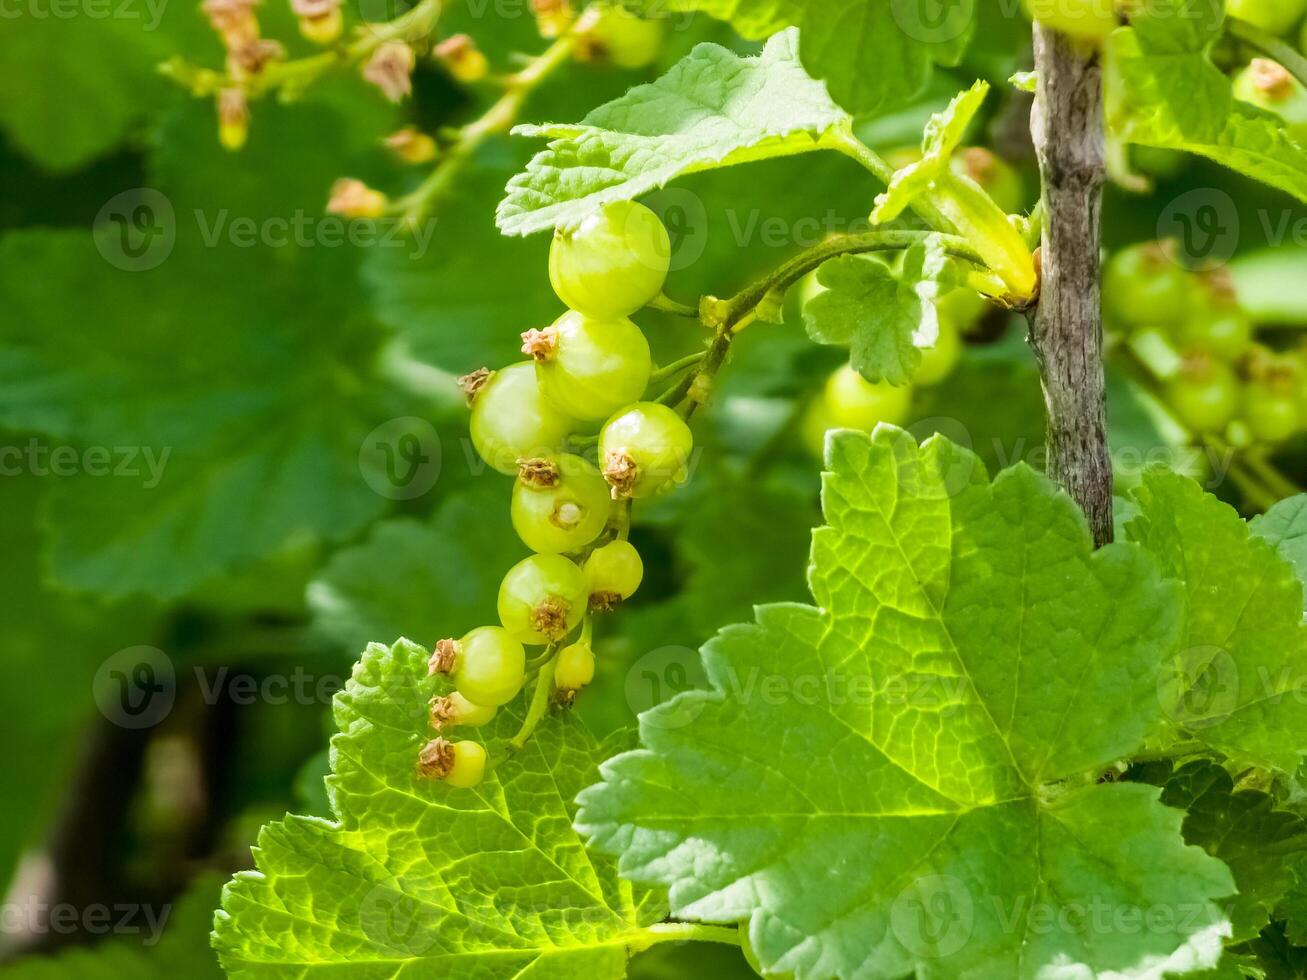 Unripe berries of red currant Ribes nigrum. Ripening berries in the garden photo